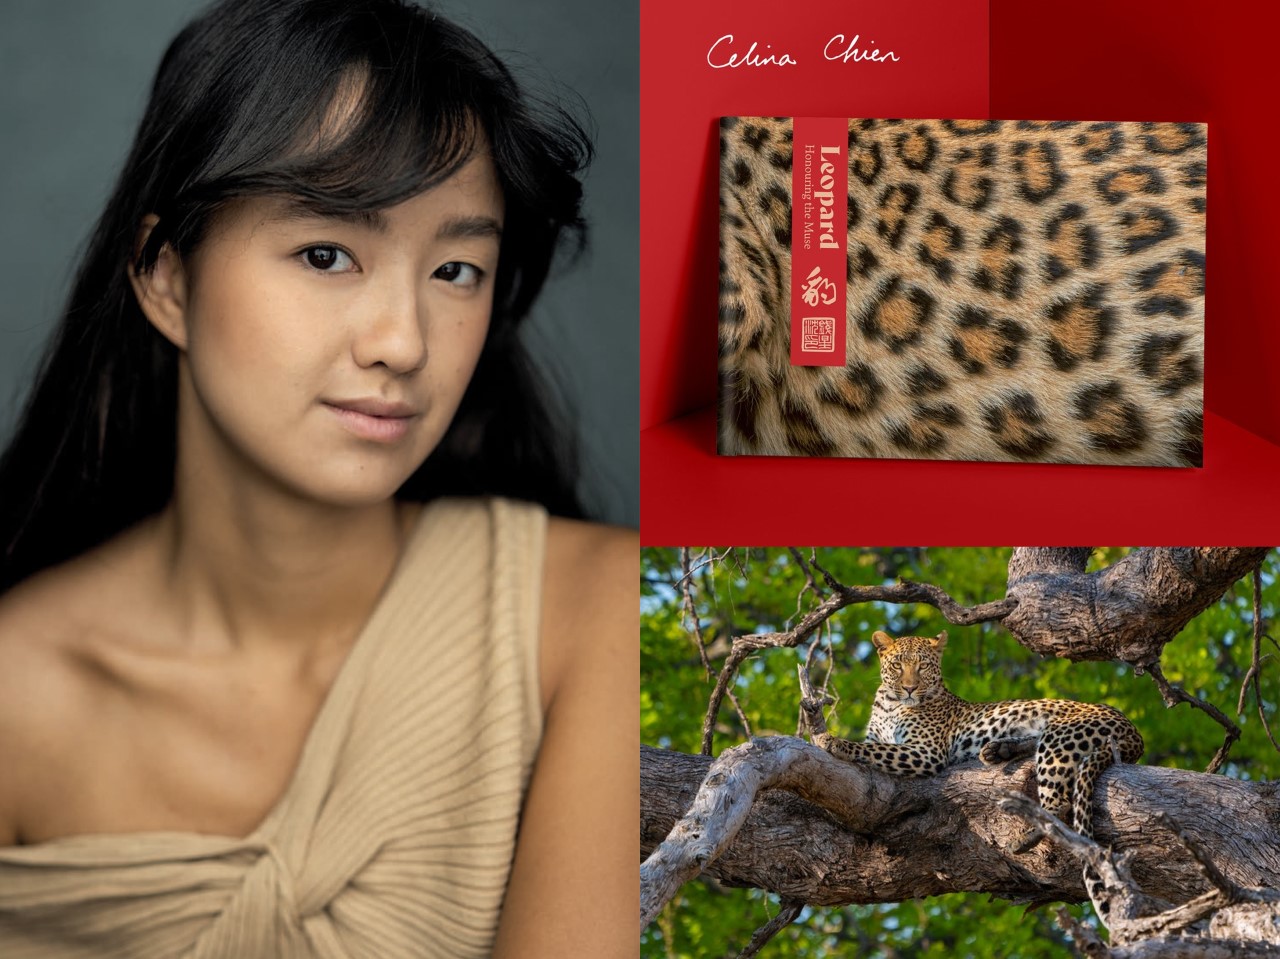 Celina Chien and leopards